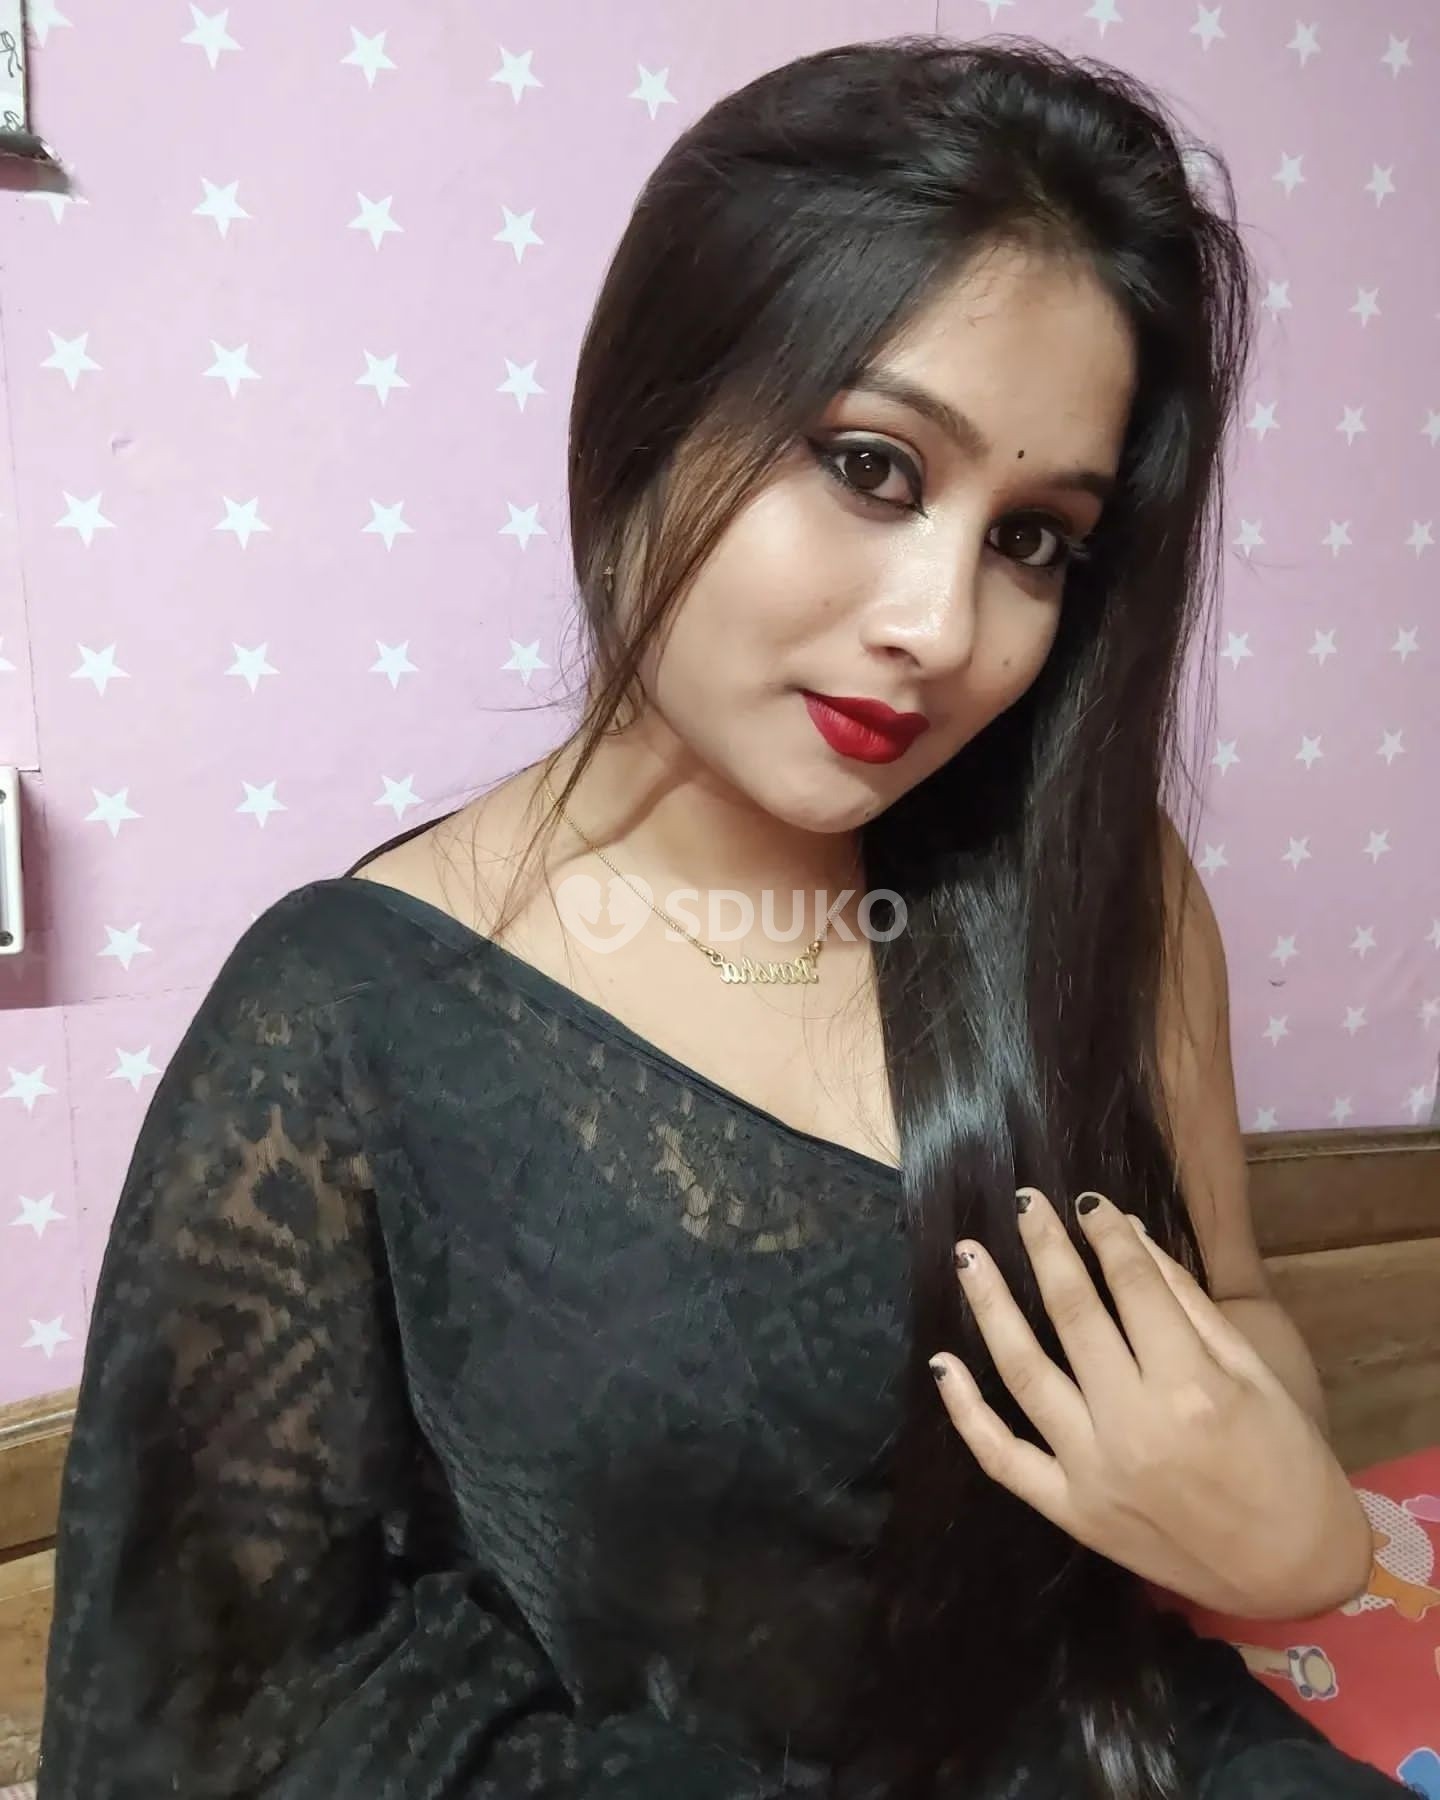 Indore%🆑 TODAY LOW PRICE 100% SAFE AND SECURE GENUINE CALL GIRL AFFORDABLE PRICE CALL NOW